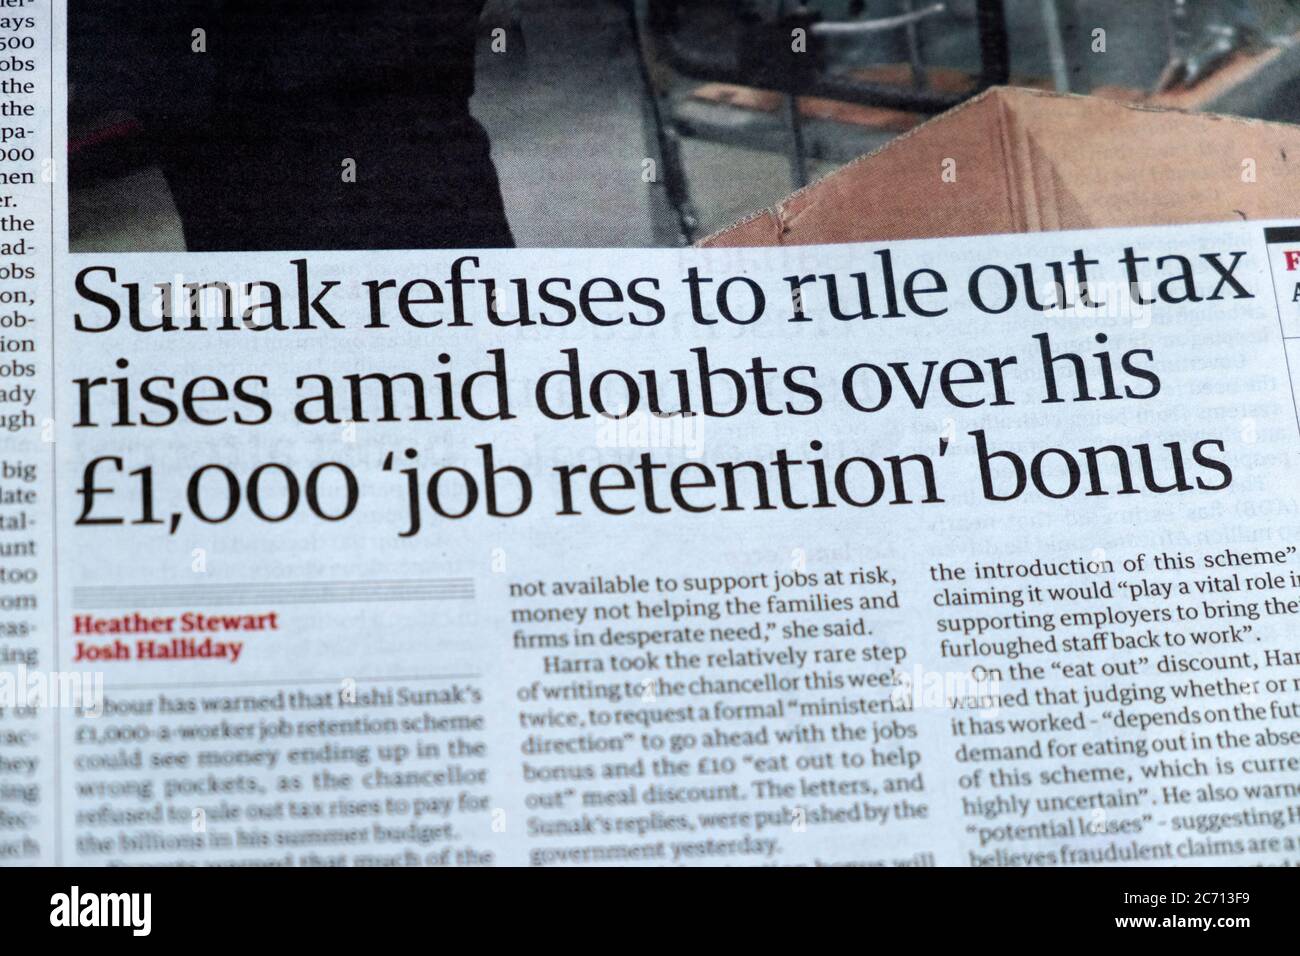 Rishi 'Sunak refuses to rule out tax rises amid doubts over his £1000 'job retention bonus' Guardian newspaper headline article in July 2020 London UK Stock Photo